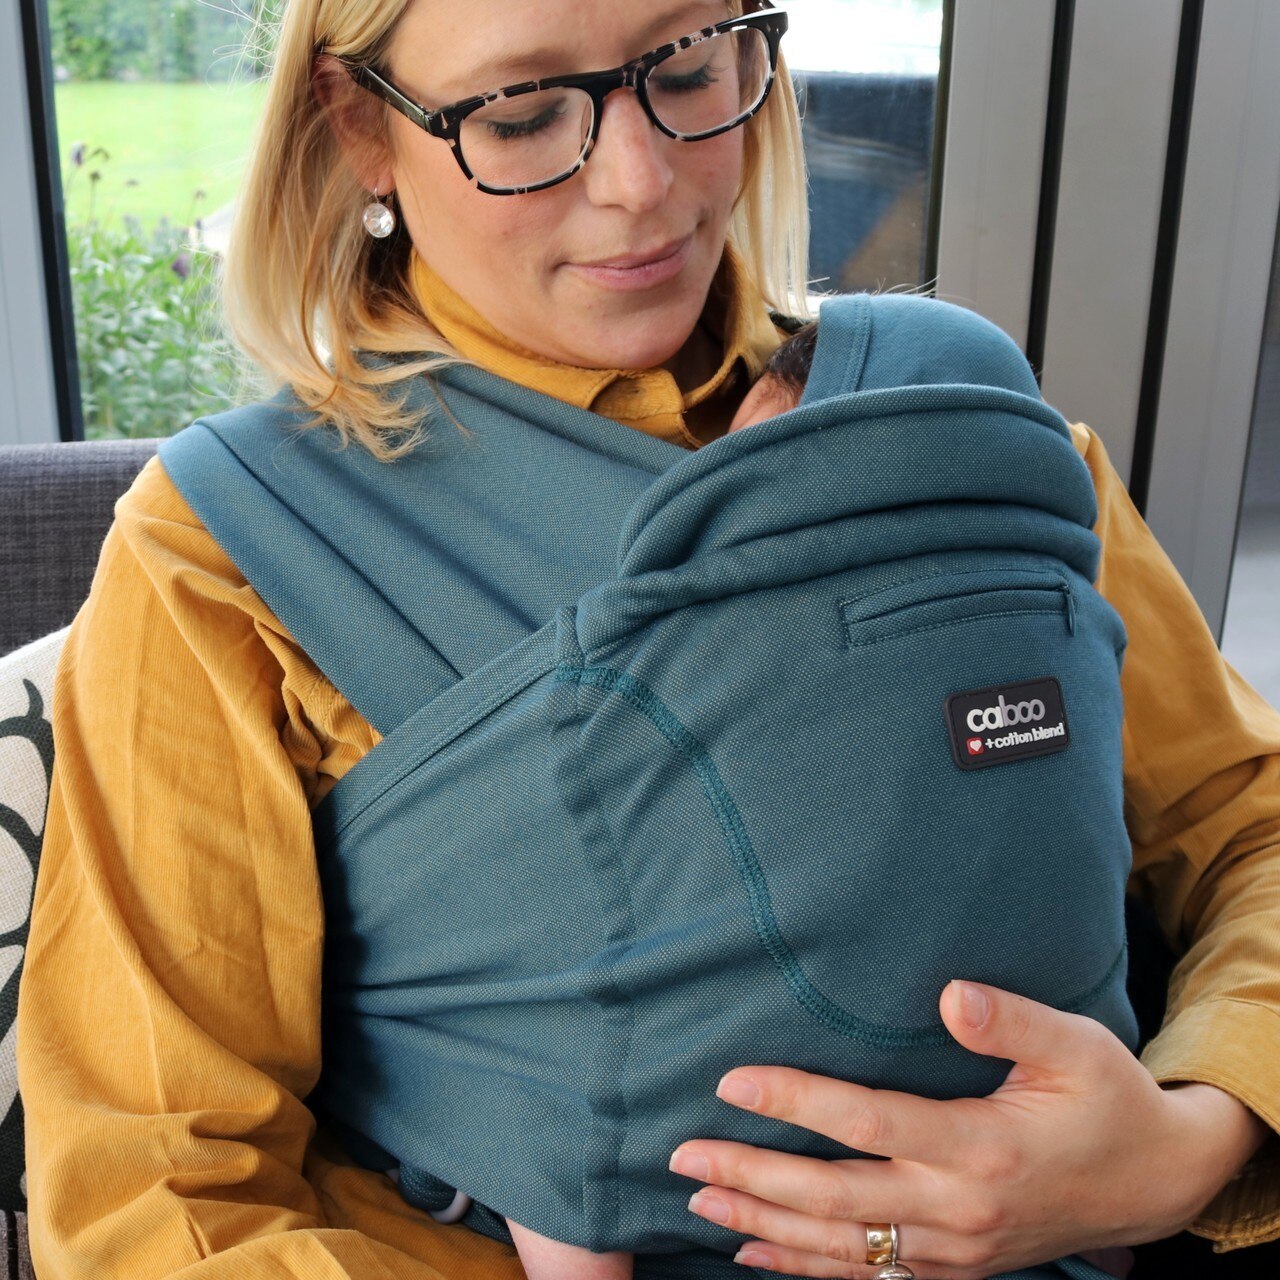 Caboo range of baby carriers